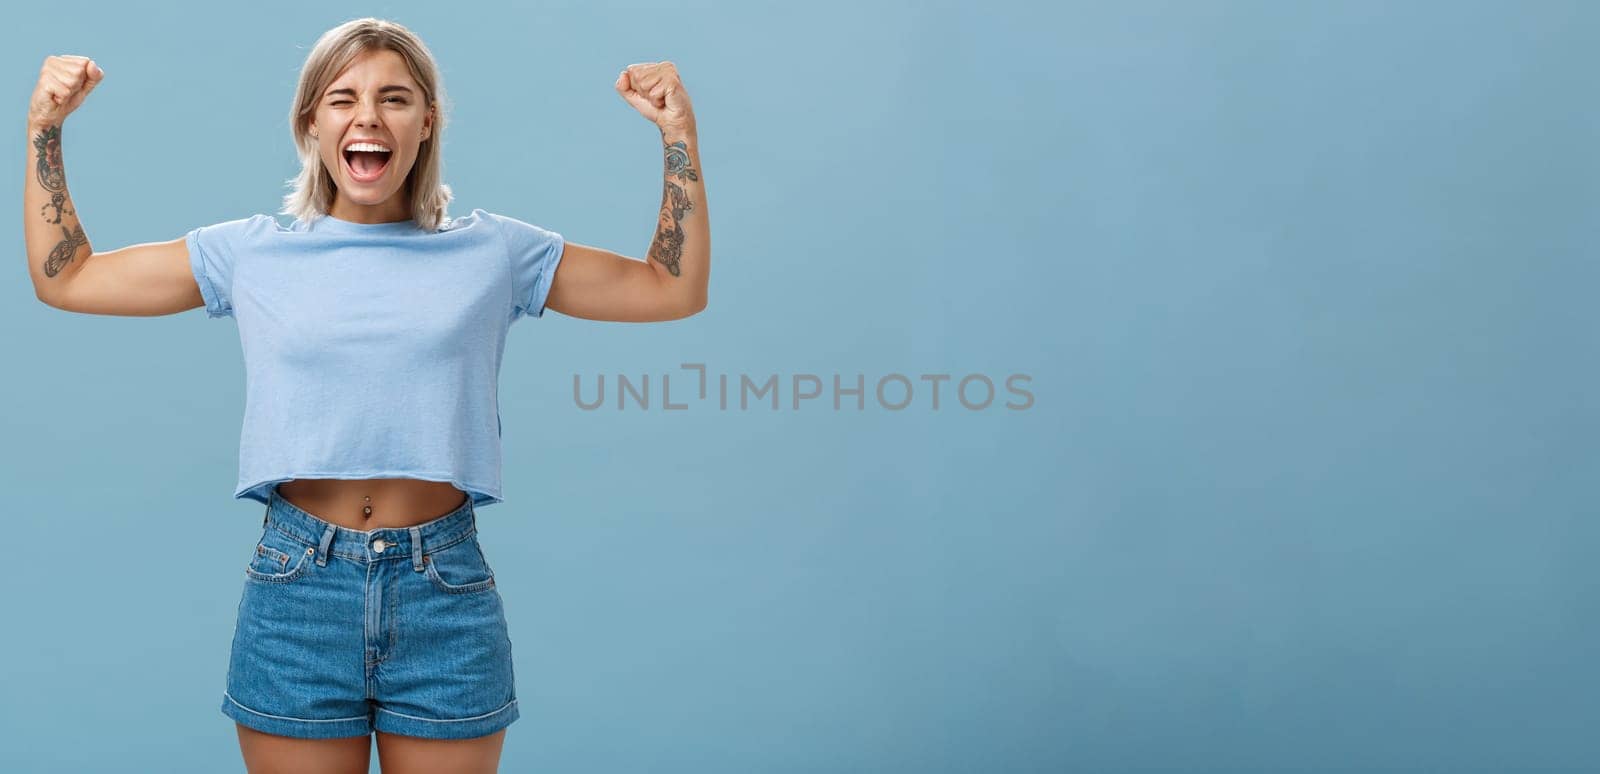 Strong women stand up and fight for rights. Portrait of happy entertained and cool young female athletic blonde with tattoos winking and smiling showing muscles and biceps over blue wall.